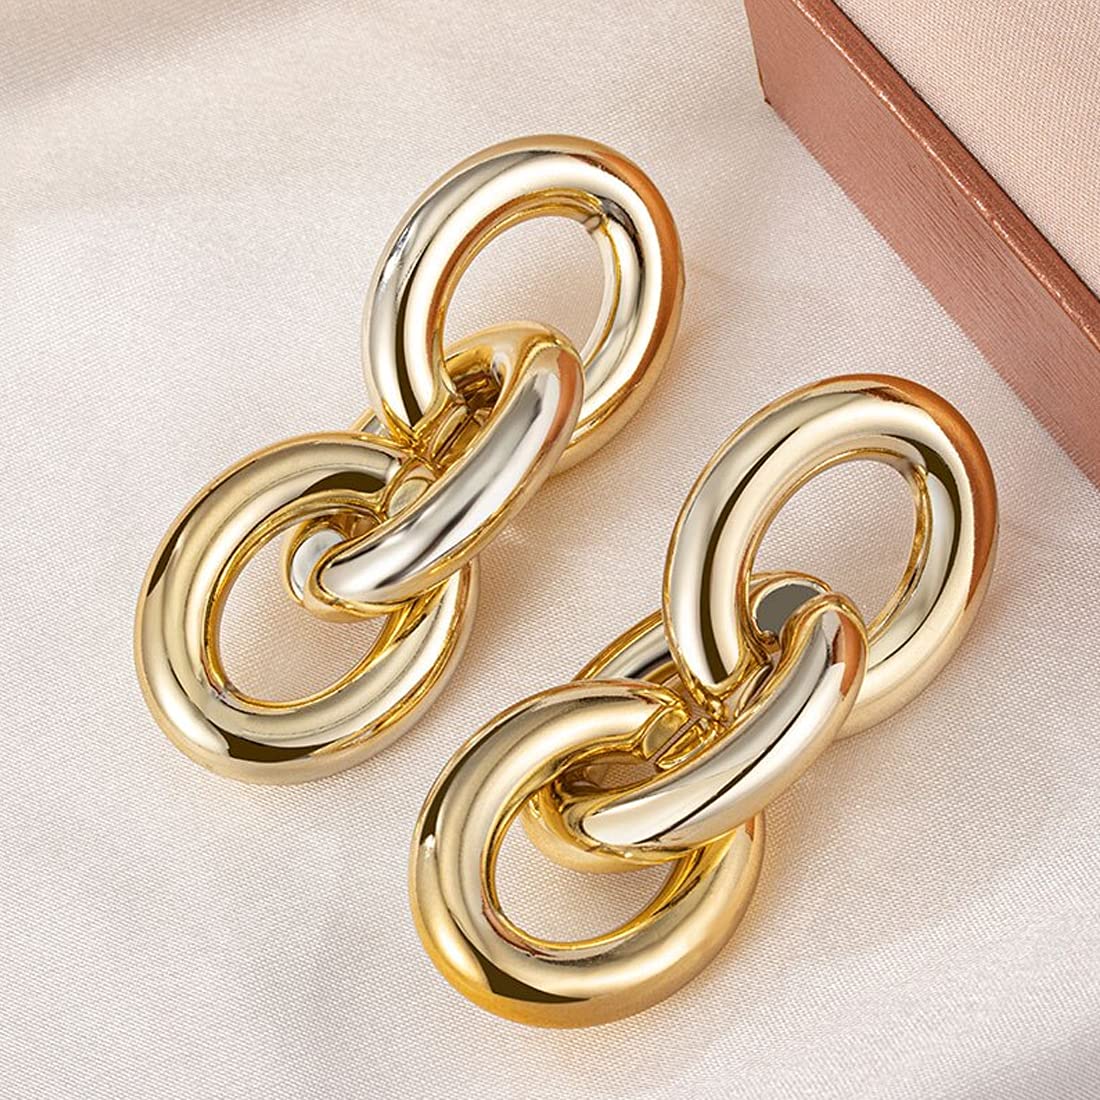 Yellow Chimes Drop Earrings for Women Combo of 2 Pairs Gold Plated Geometric Design Circle Chain Drop Earrings for Women and Girls.